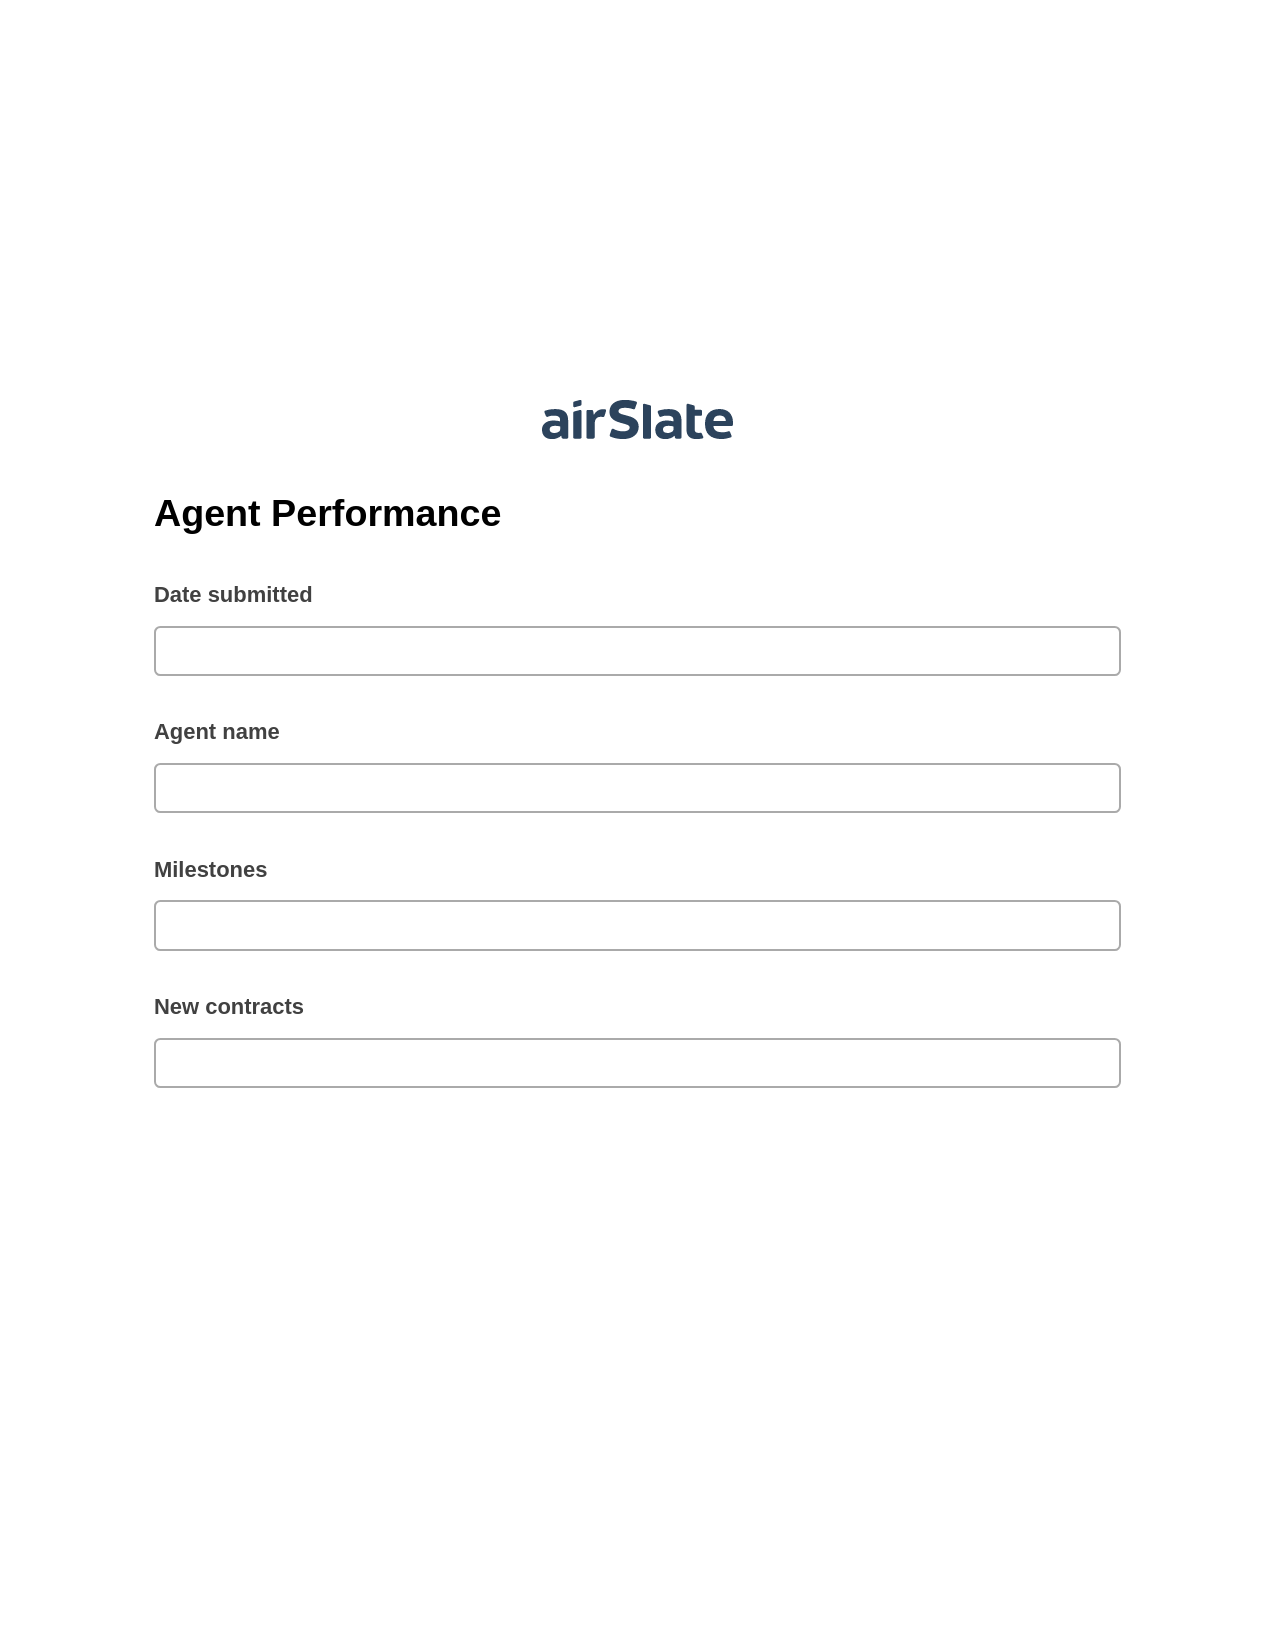 Agent Performance Pre-fill from another Slate Bot, Add Tags to Slate Bot, Archive to OneDrive Bot